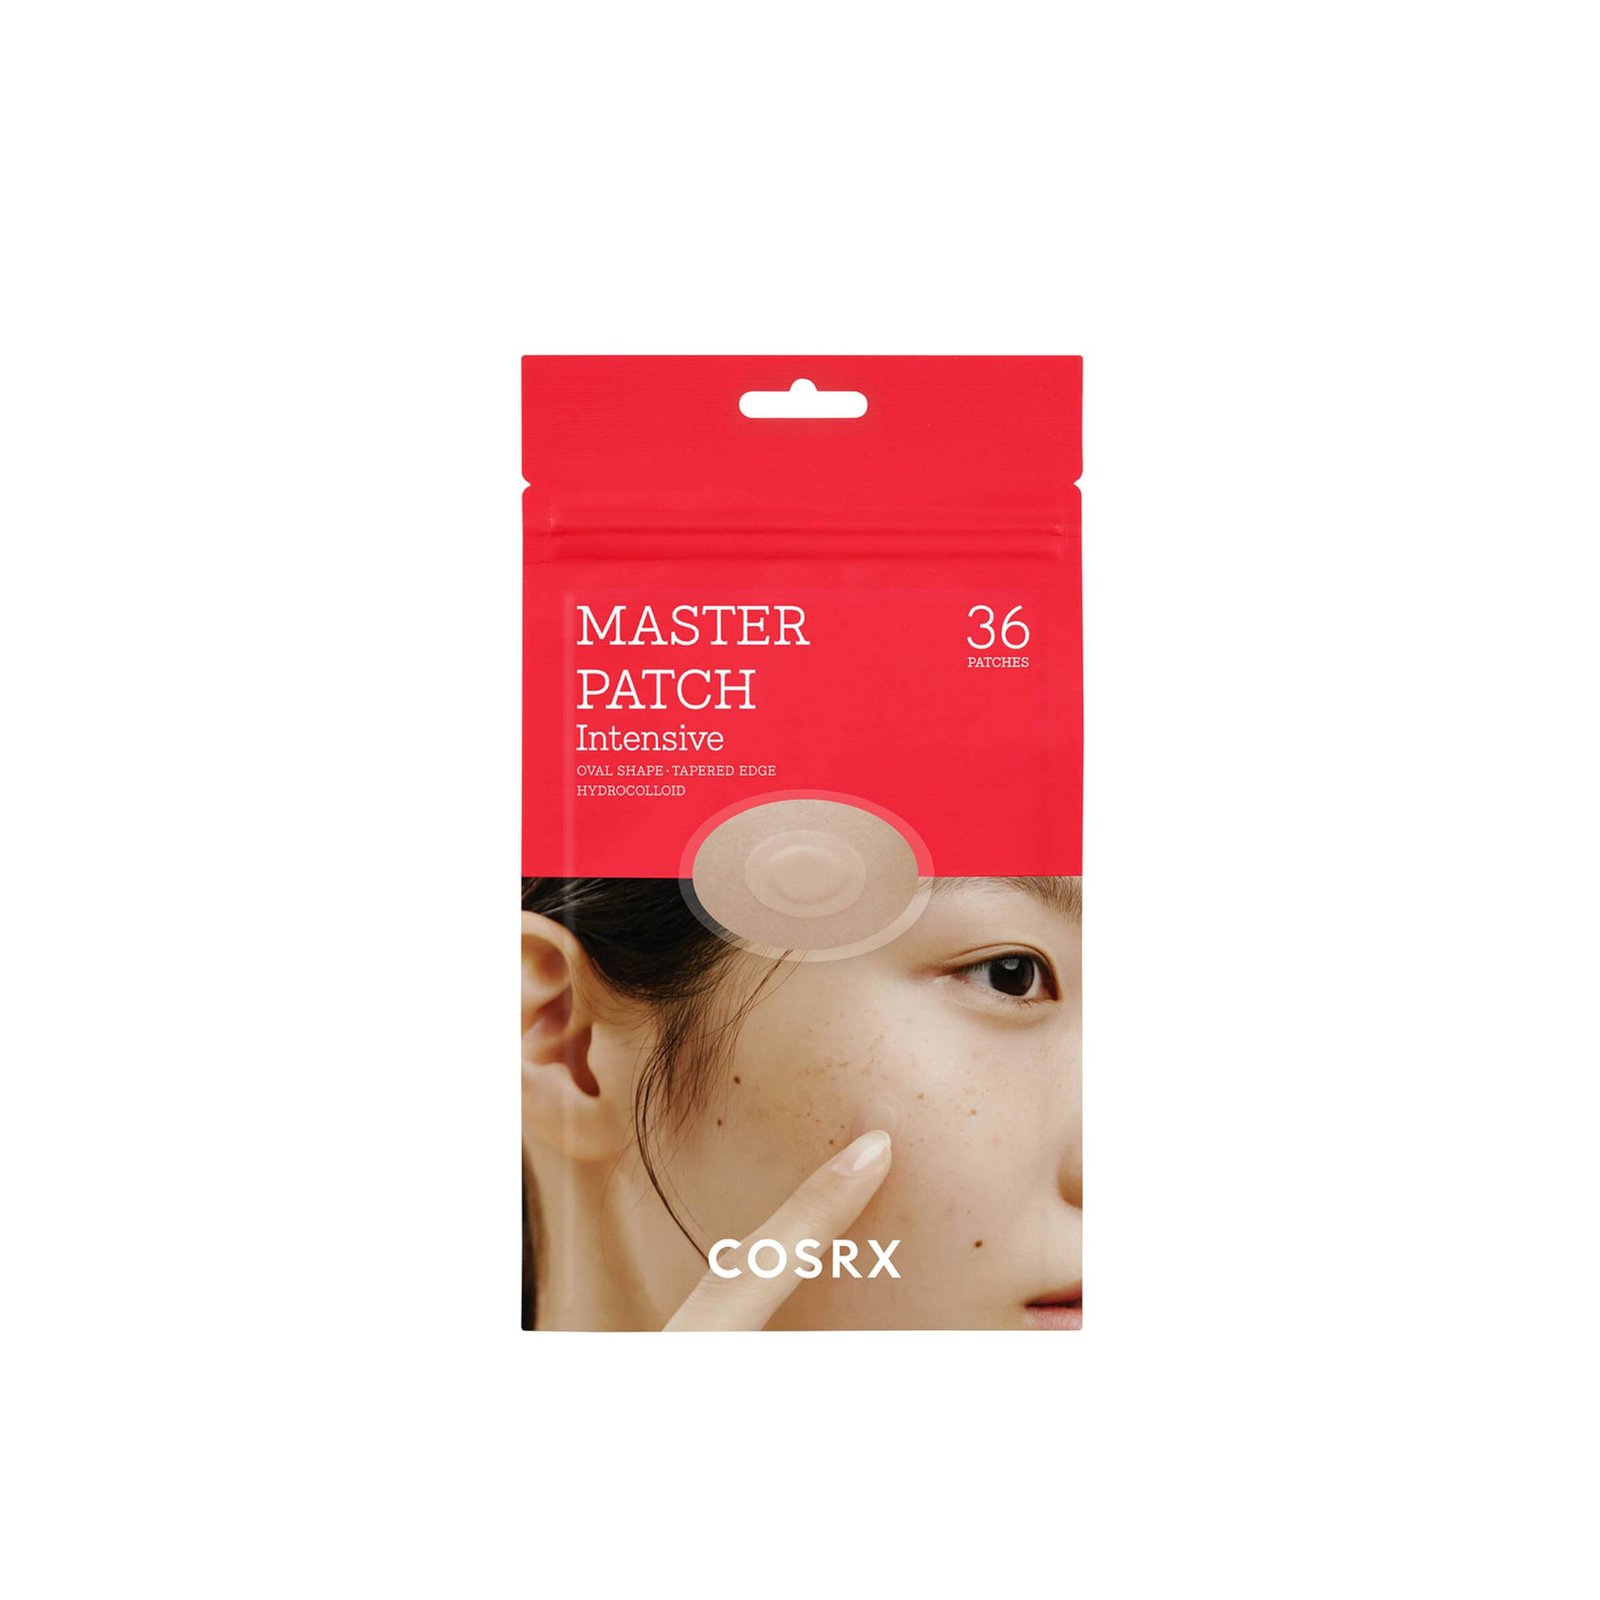 COSRX Master Patch Intensive x36